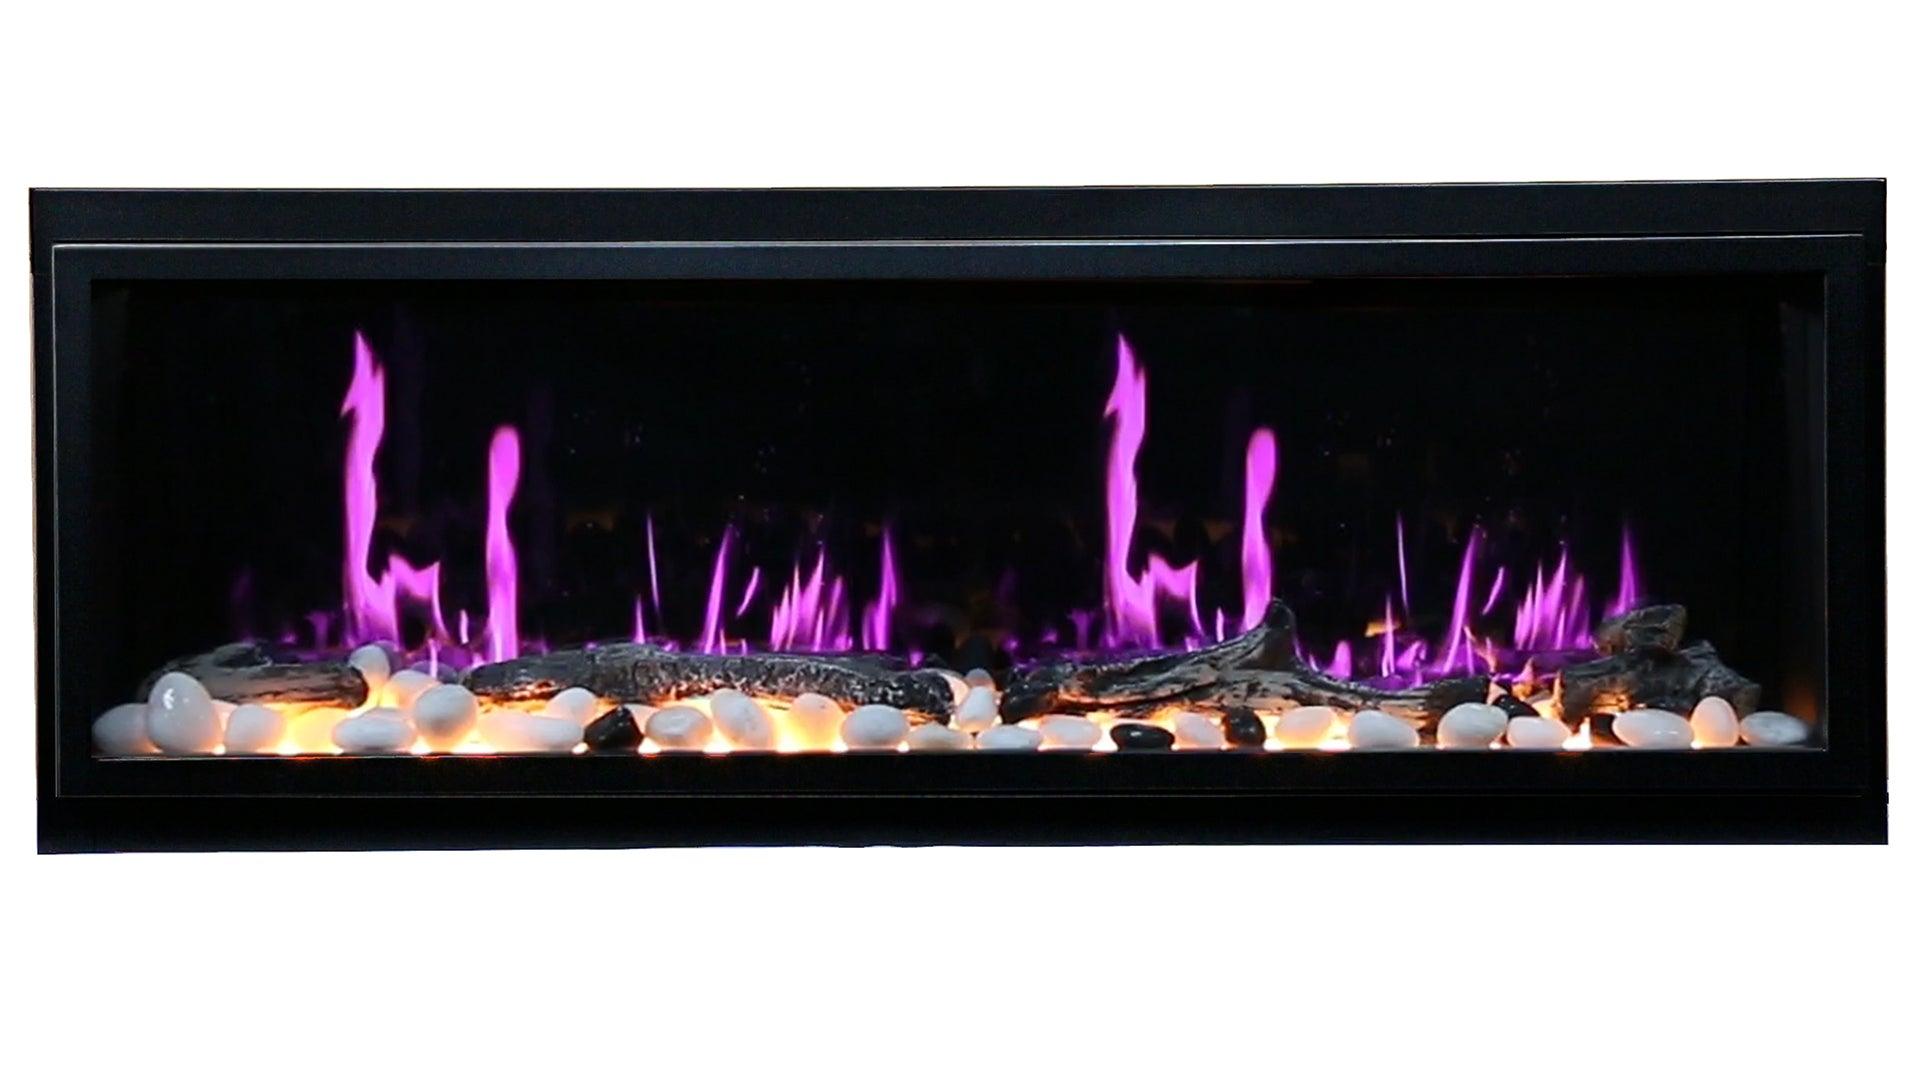 ZopaFlame™ 56" Linear Built-in Electric Fireplace - BP19555V - ZopaFlame Fireplaces